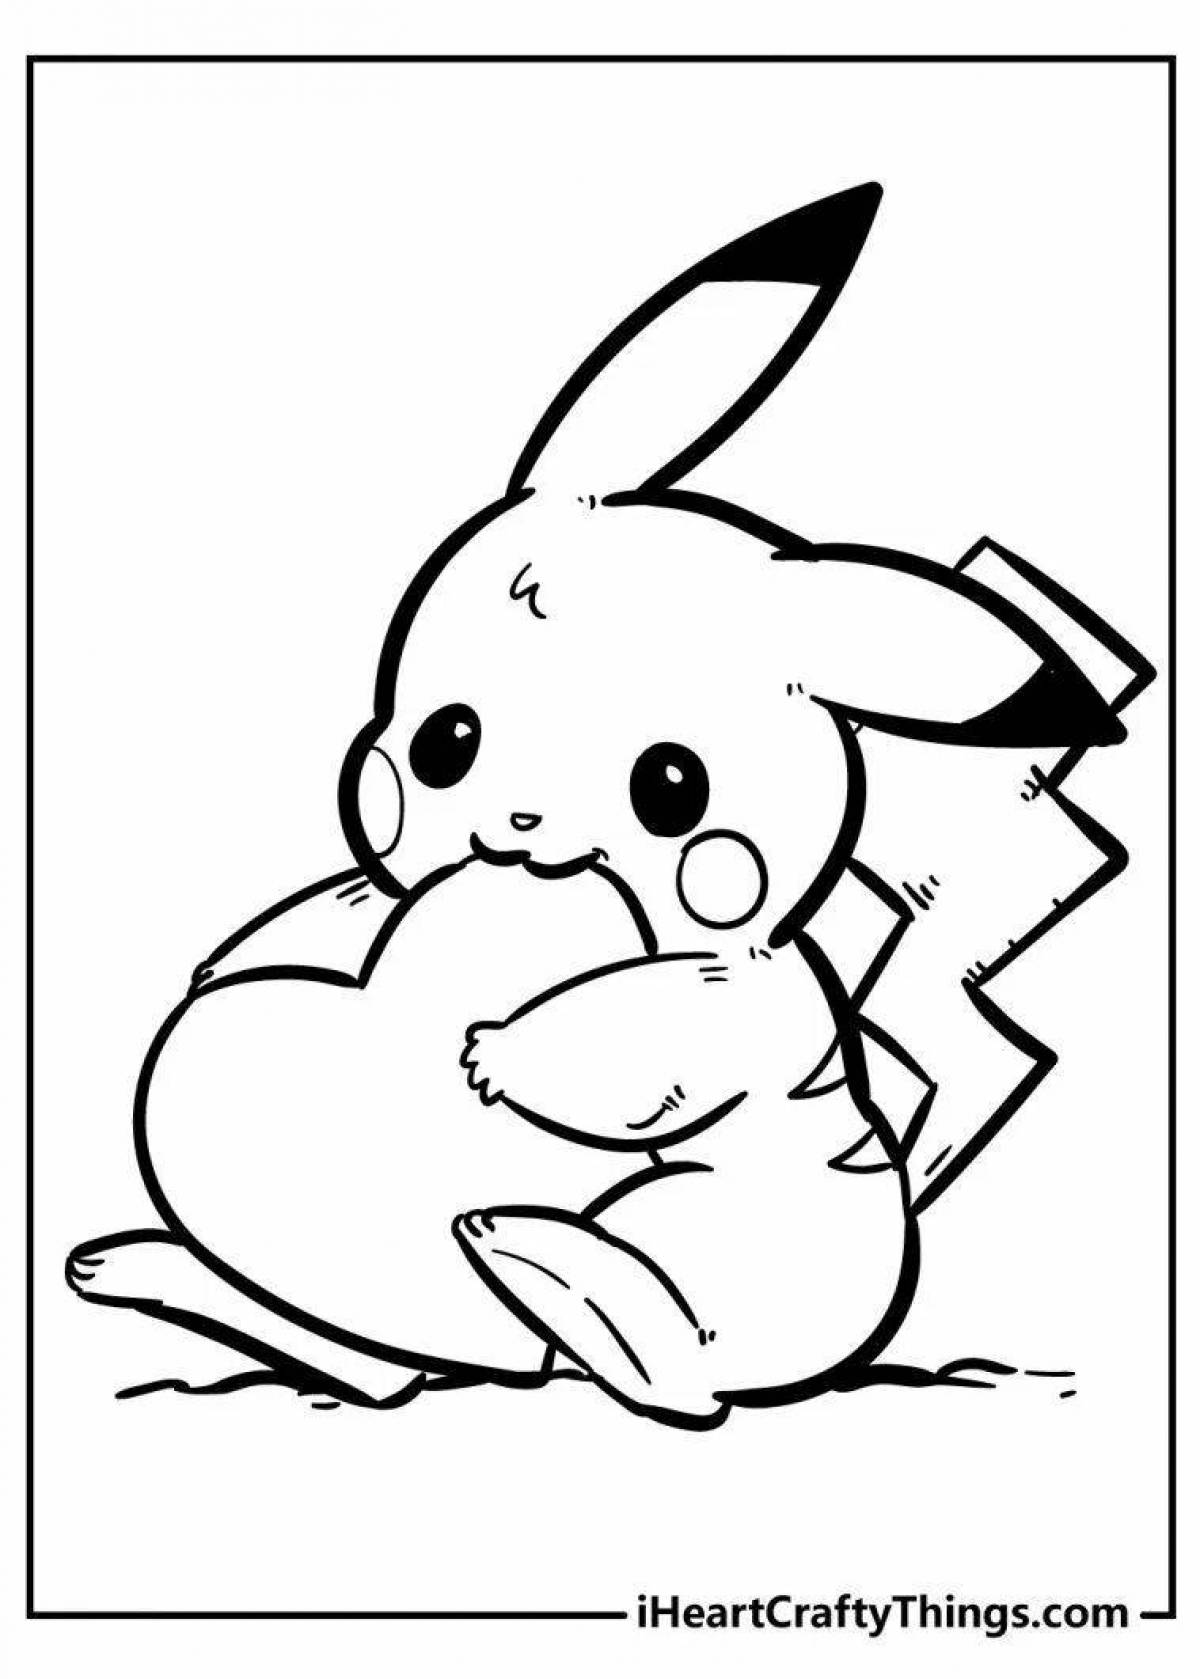 Coloring page cute pikachu with a heart